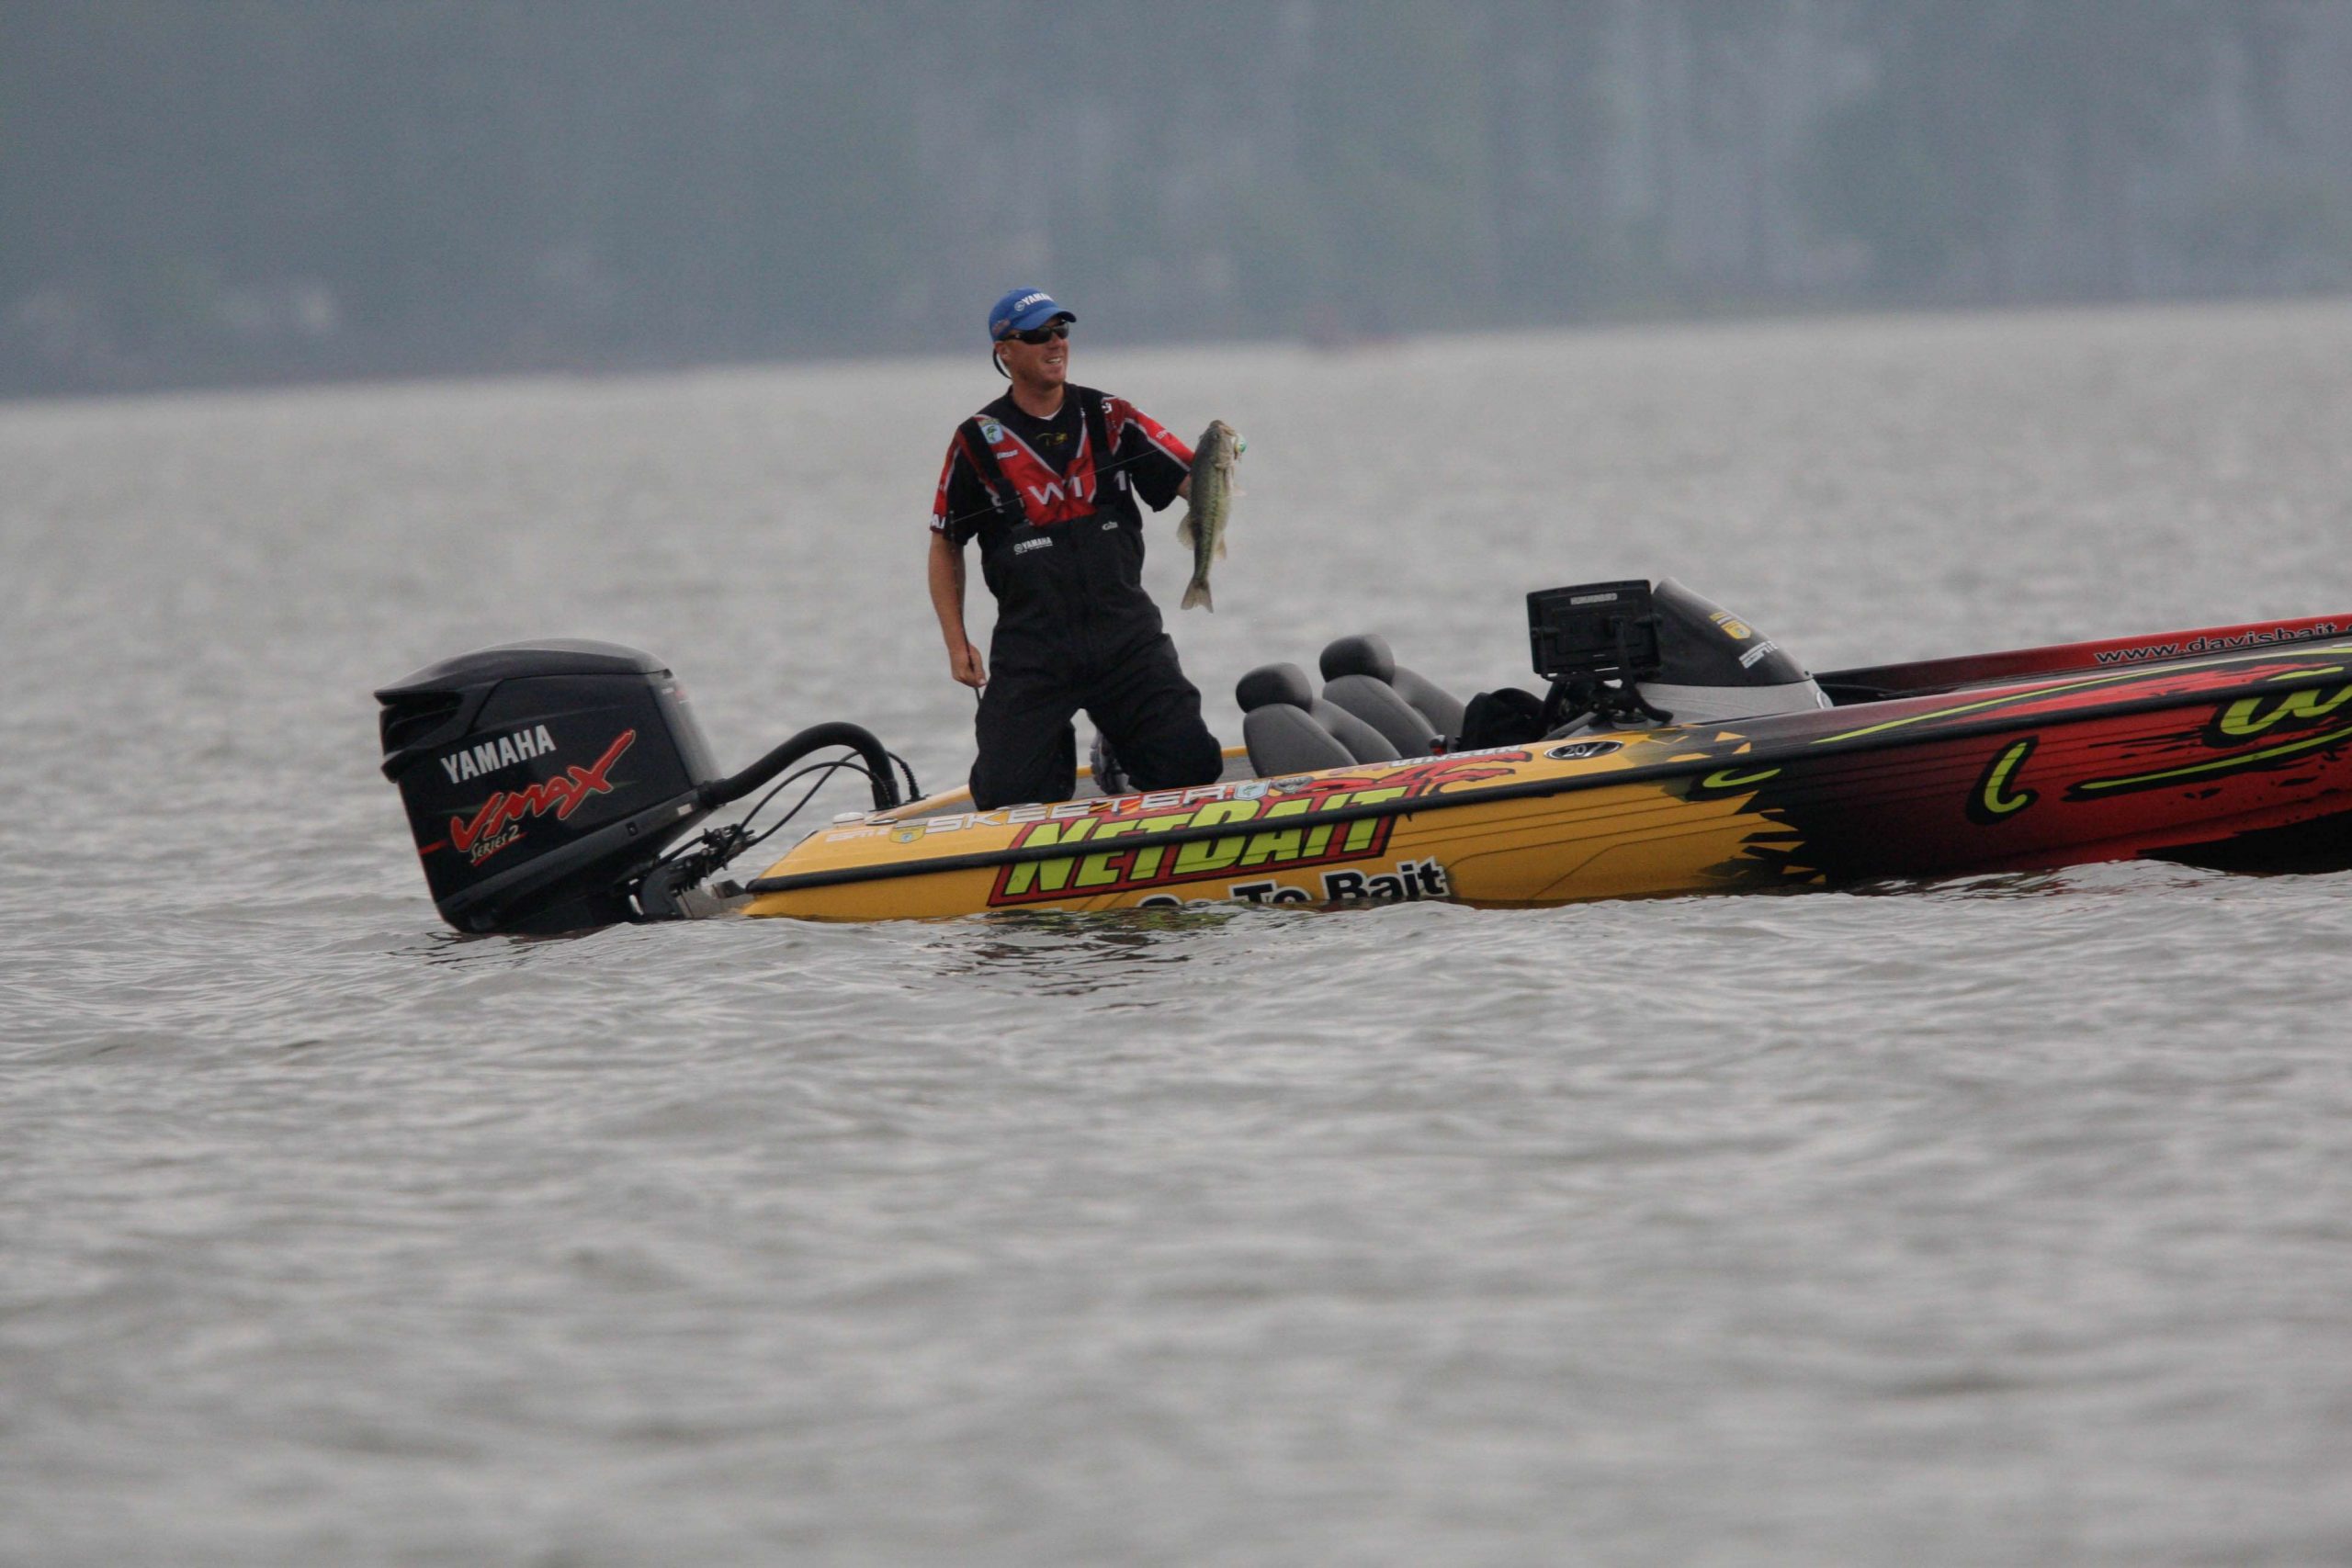 Greg Vinson was making a run at Bassmaster Rookie of the Year during the Guntersville event in 2009. He fell short, but he did score 63 pounds, 2 ounces at this tournament.